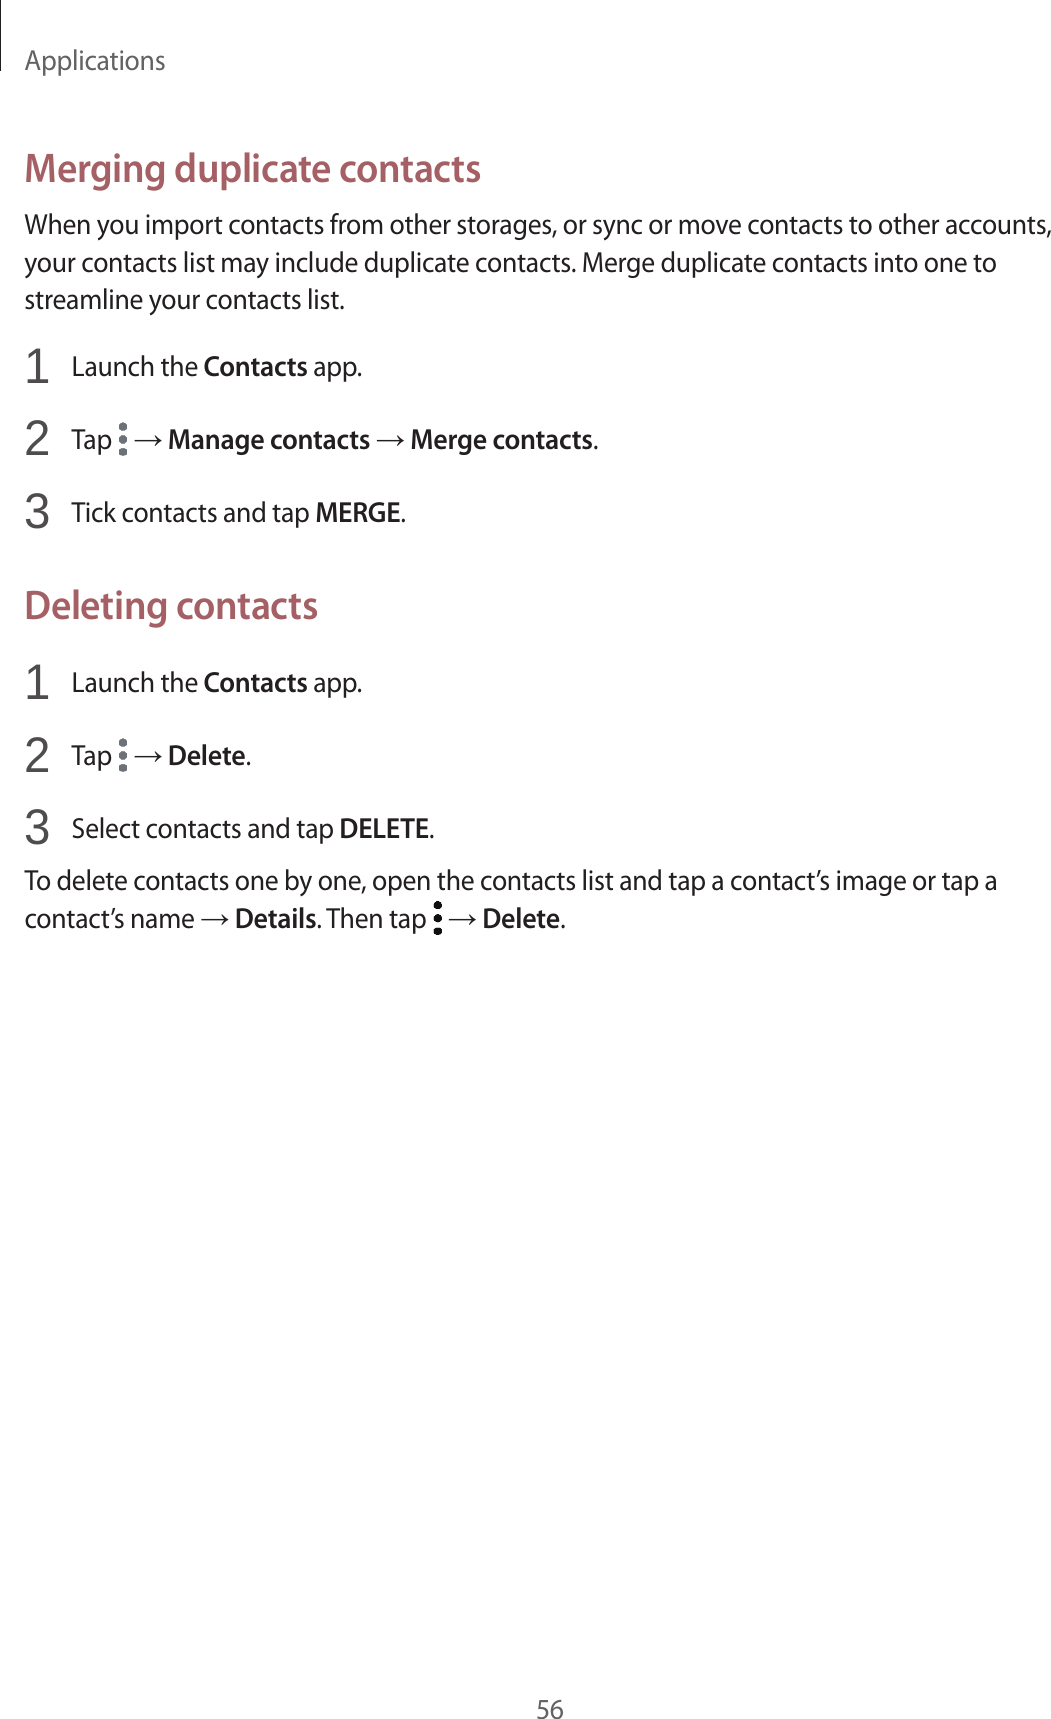 Applications56Merging duplicate contactsWhen you import contacts from other storages, or sync or move contacts to other accounts, your contacts list may include duplicate contacts. Merge duplicate contacts into one to streamline your contacts list.1  Launch the Contacts app.2  Tap   → Manage contacts → Merge contacts.3  Tick contacts and tap MERGE.Deleting contacts1  Launch the Contacts app.2  Tap   → Delete.3  Select contacts and tap DELETE.To delete contacts one by one, open the contacts list and tap a contact’s image or tap a contact’s name → Details. Then tap   → Delete.